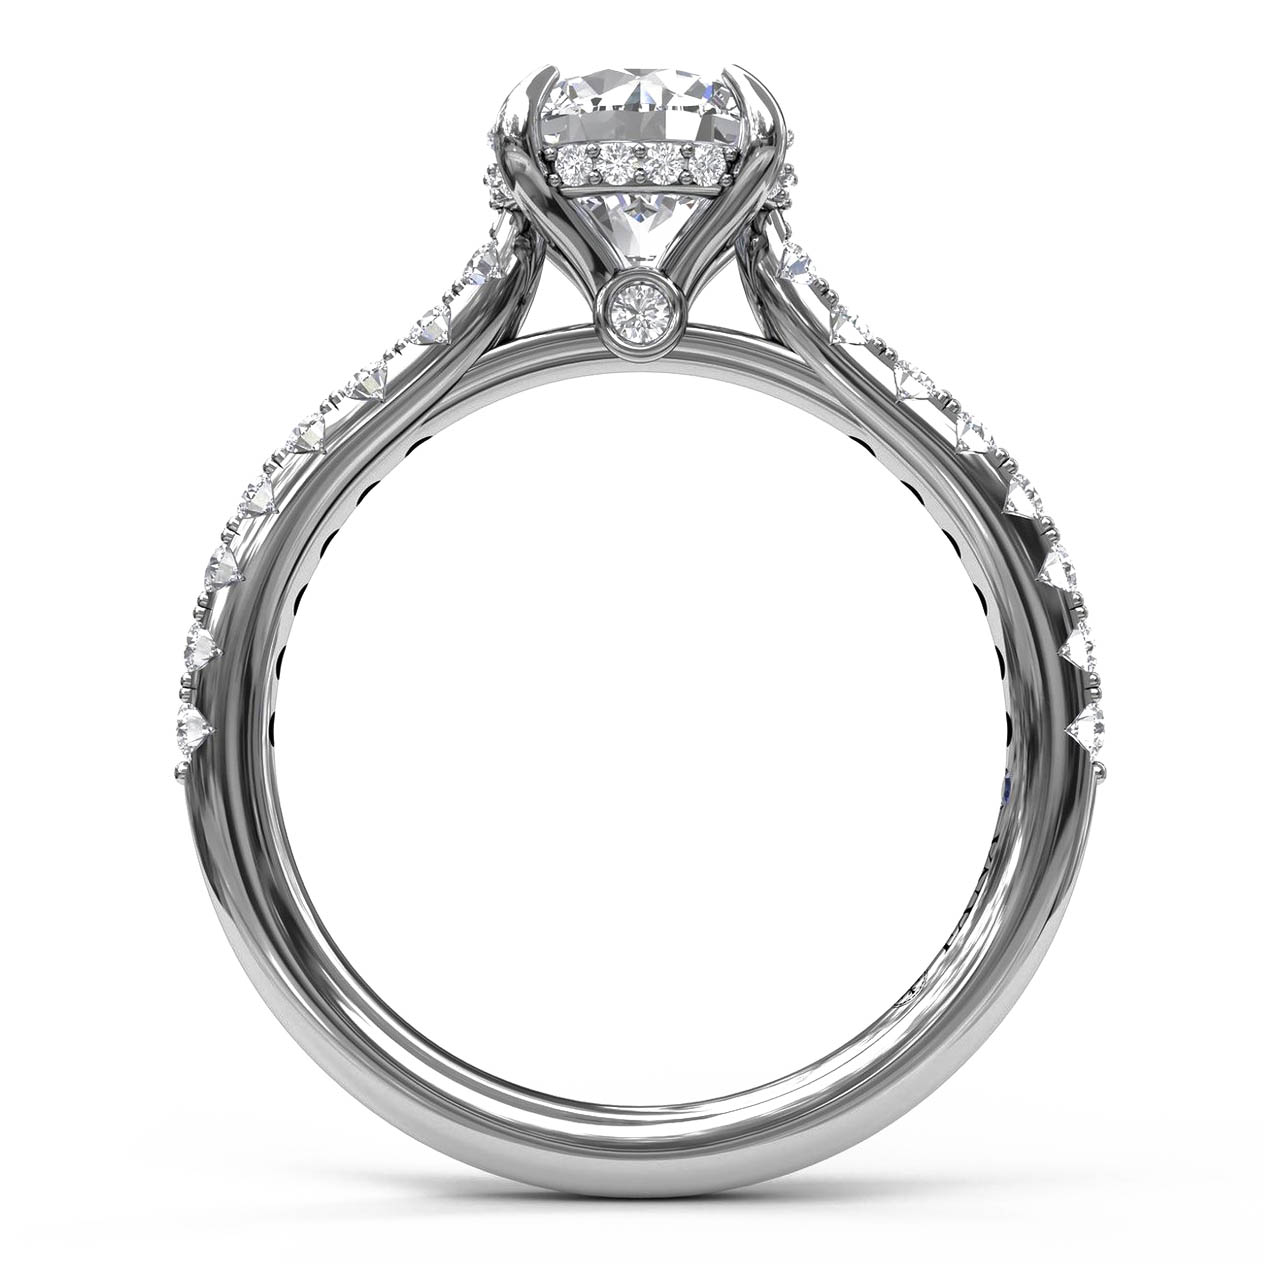 Fana Hidden Halo Diamond Engagement Ring Setting in 14kt White Gold (3/8ct tw)